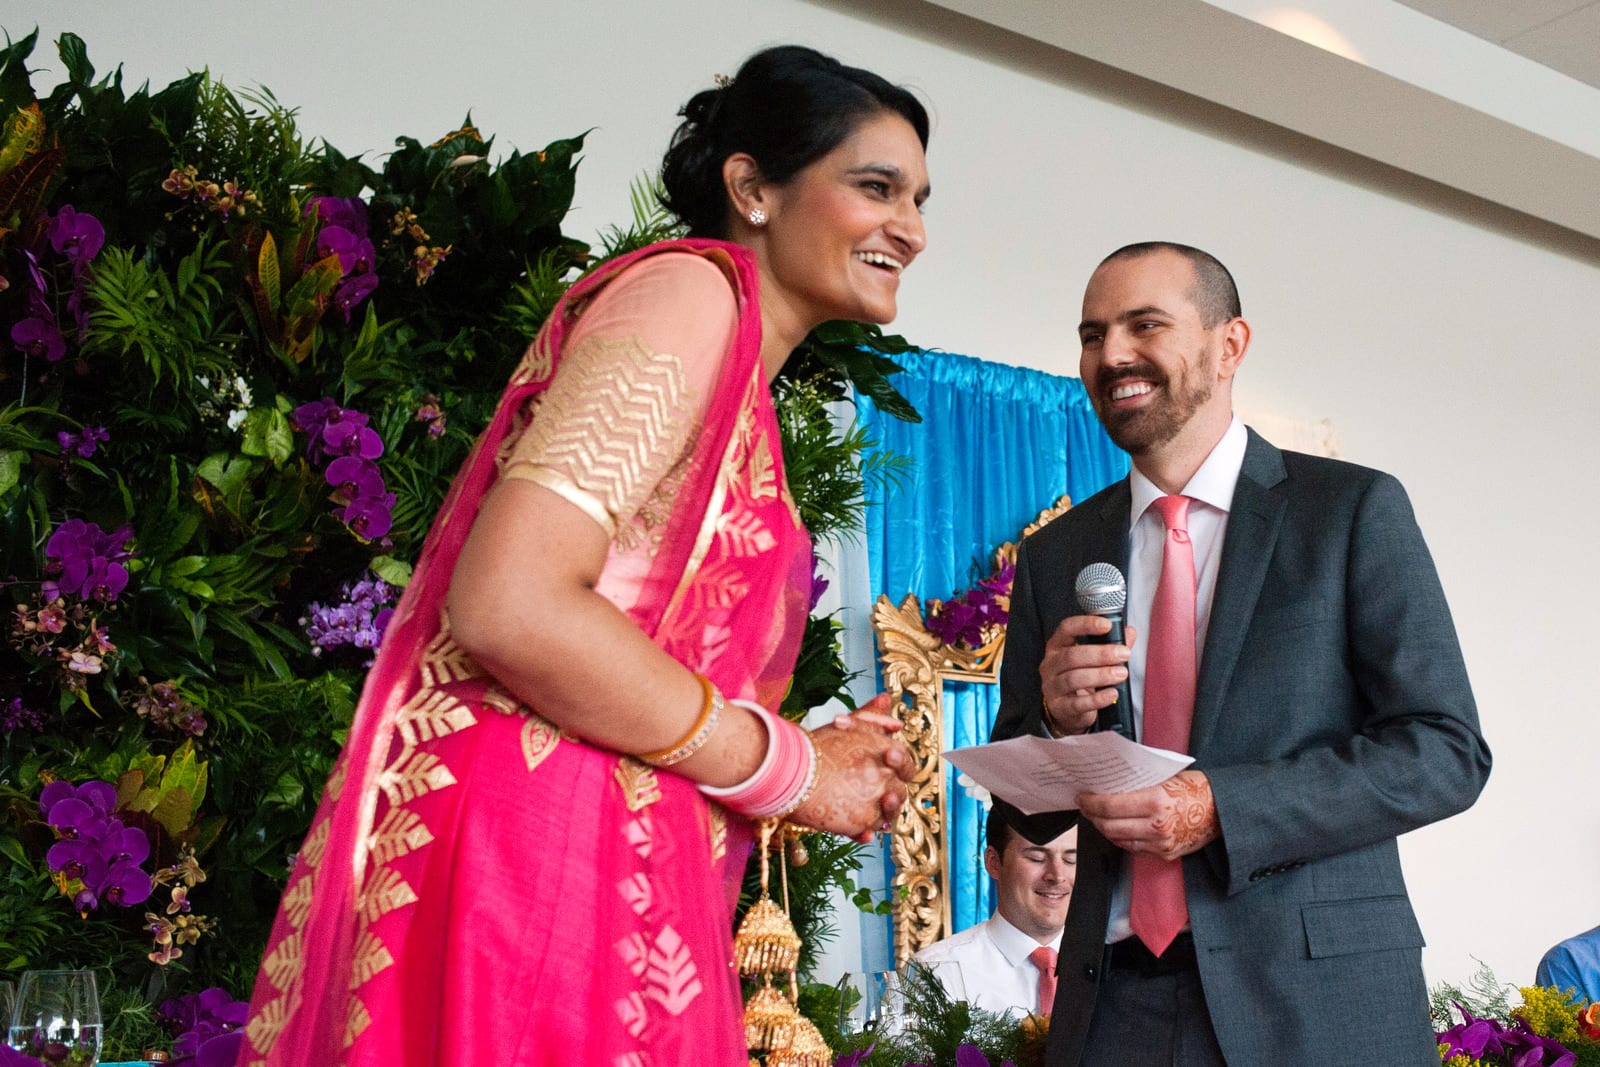 A bride in a chartreuse and gold sari laughs with her groom wearing a grey suit as they express greetings to their guests at their Renaissance Phipps South Asian Wedding.